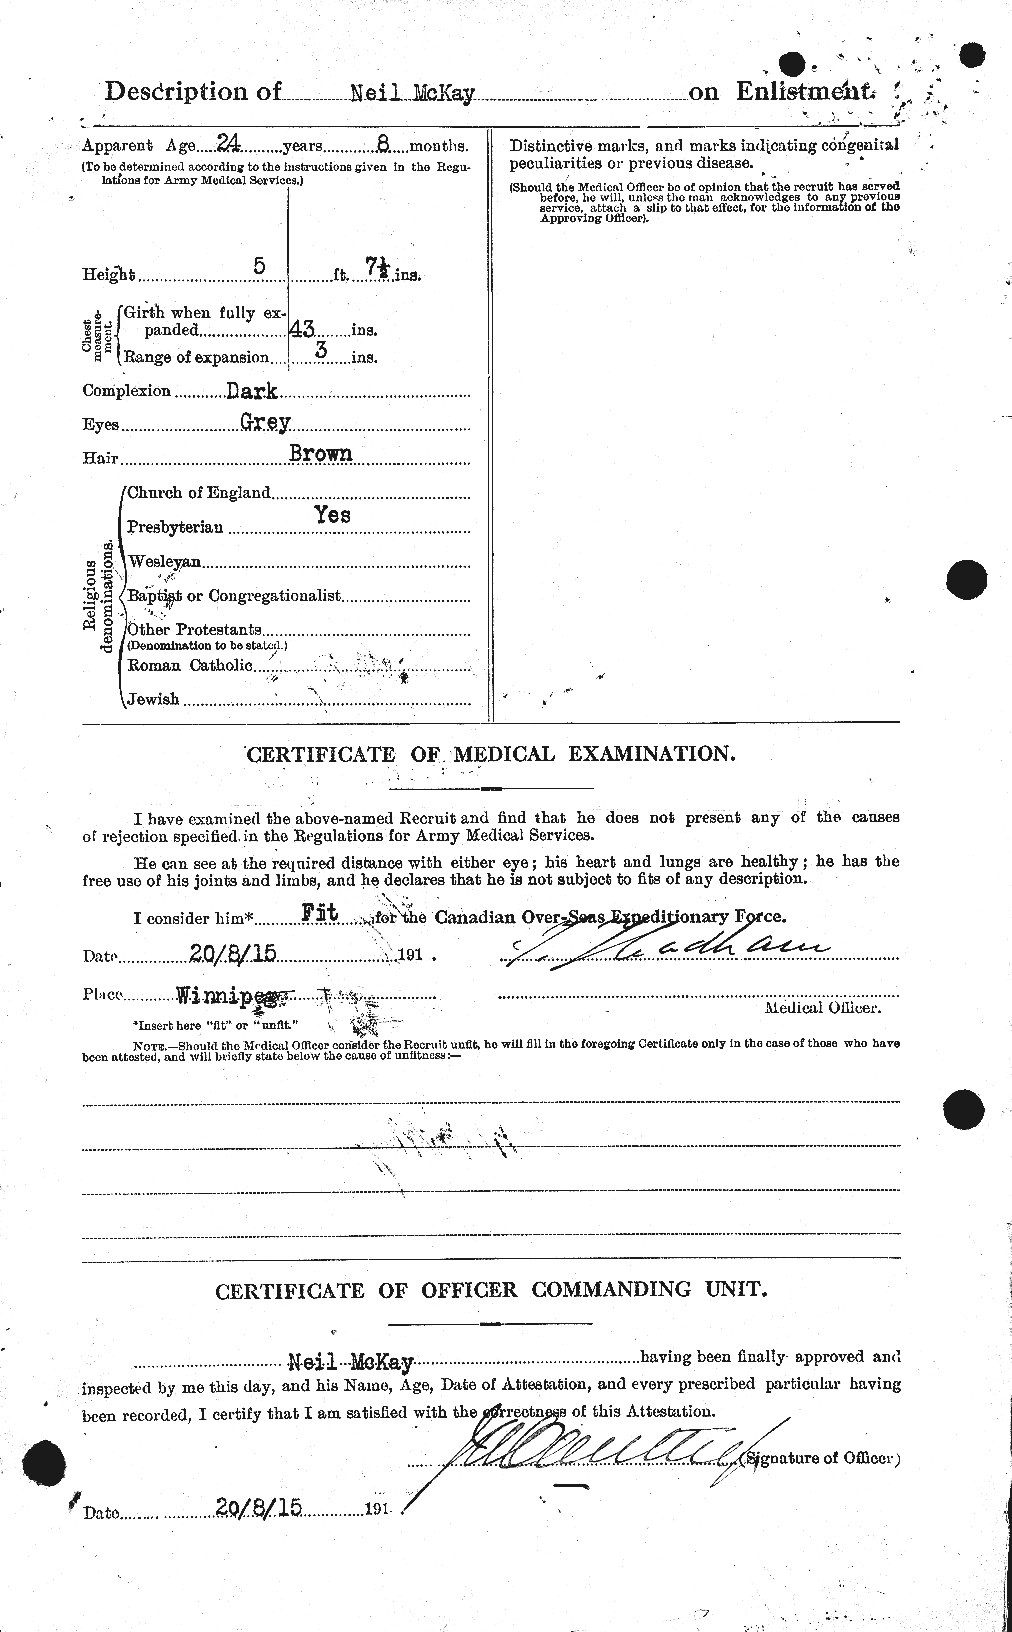 Personnel Records of the First World War - CEF 527202b